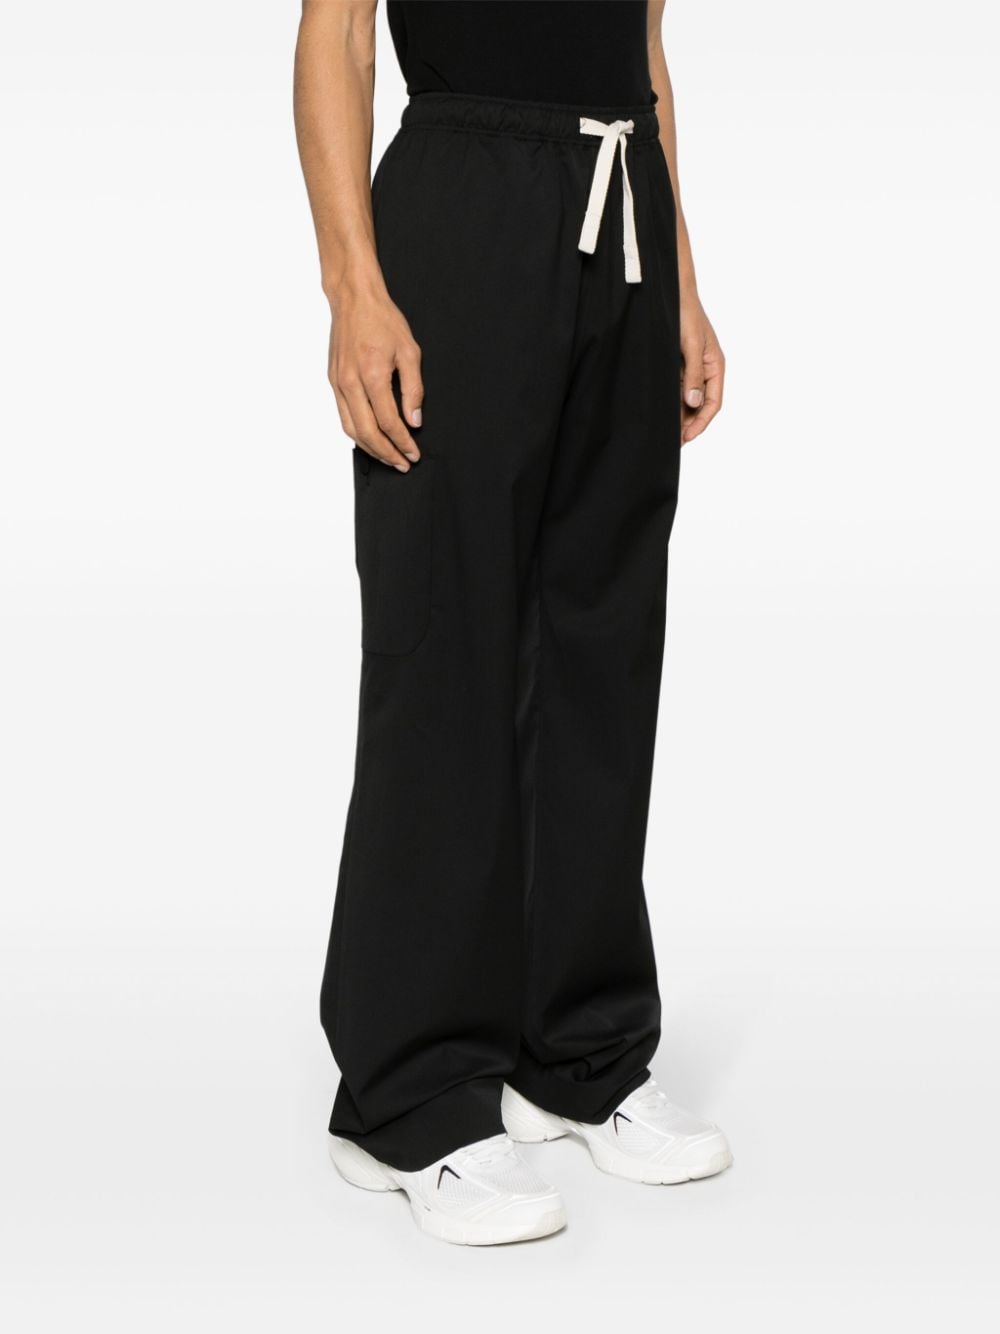 Black cargo trousers with drawstring